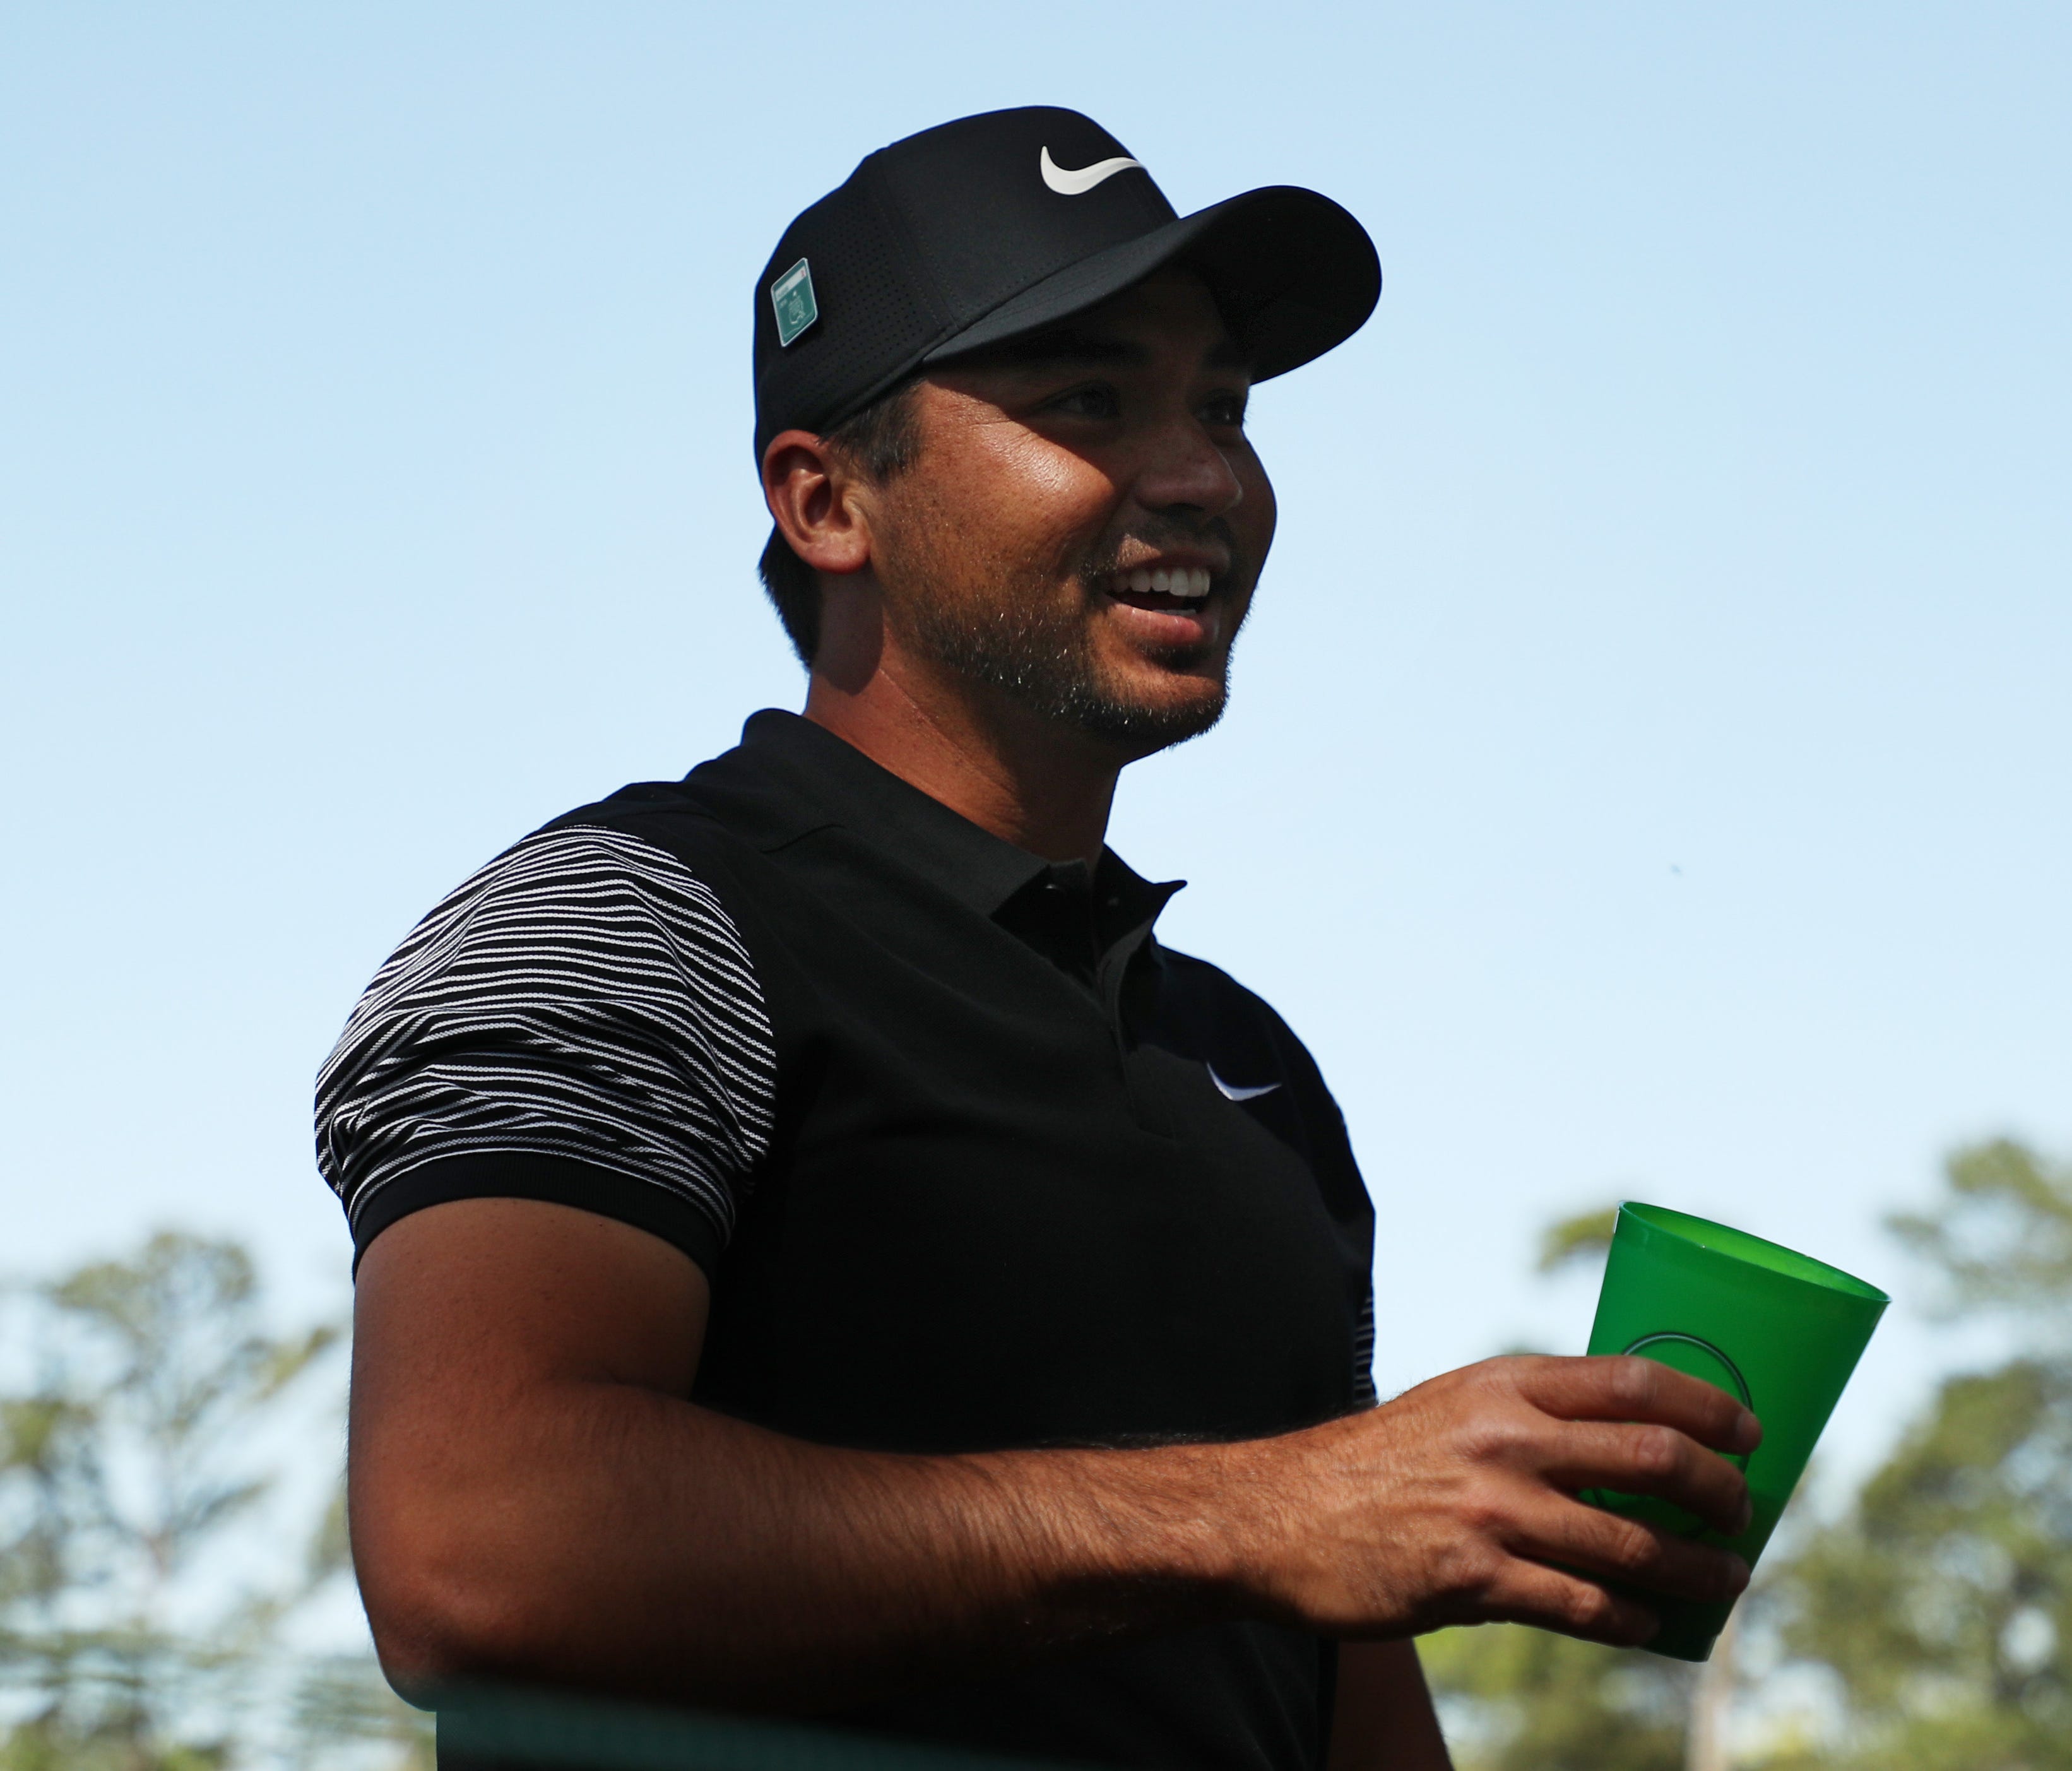 Jason Day of Australia talks with a patron after his shot landed in the patron's beverage during the first round of the 2018 Masters Tournament at Augusta National Golf Club on April 5.